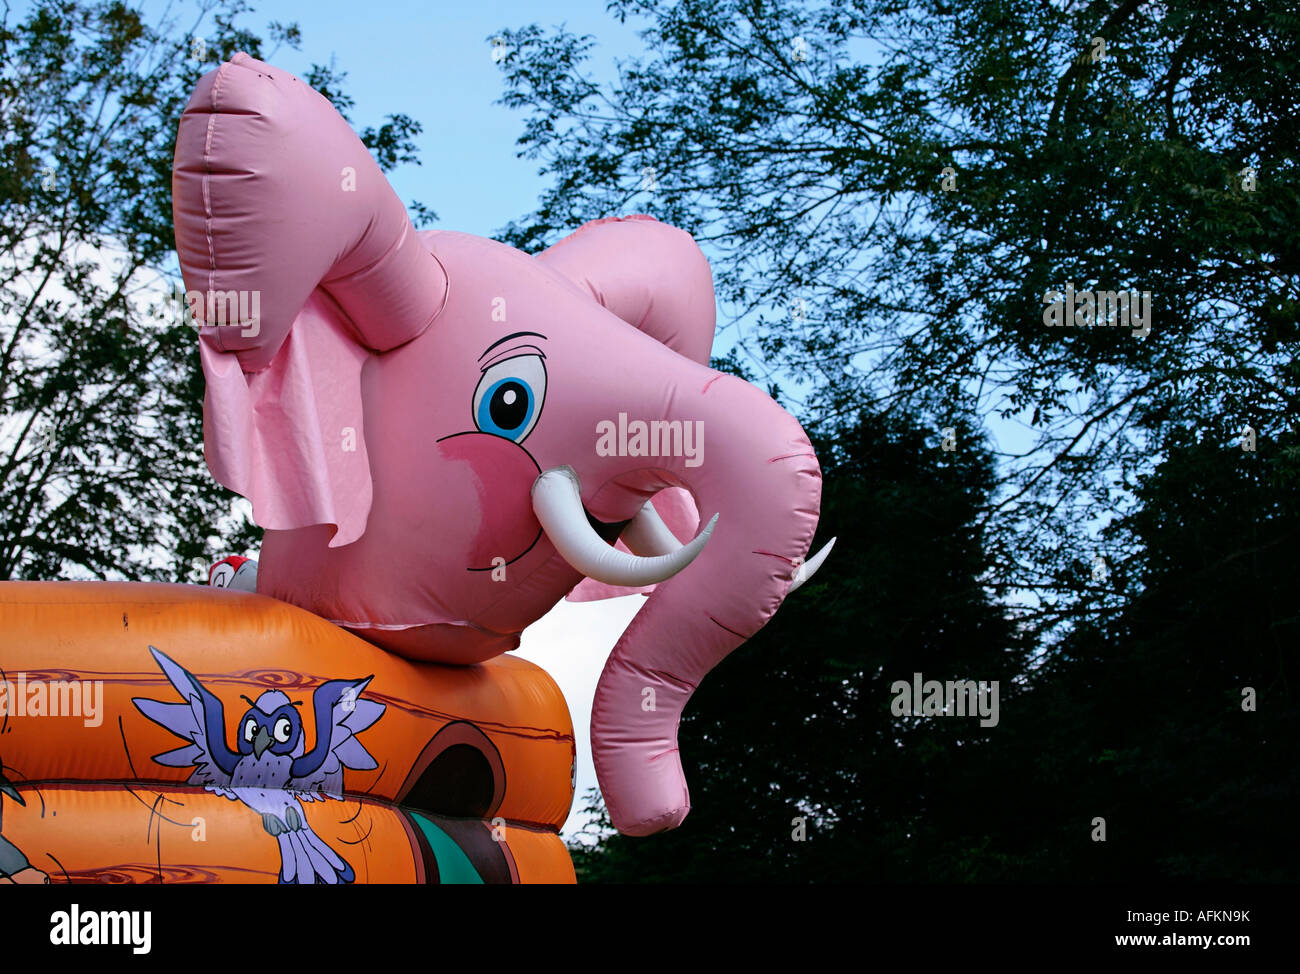 Large pink plastic inflatable elephant on Noah's Ark bouncy castle Stock Photo